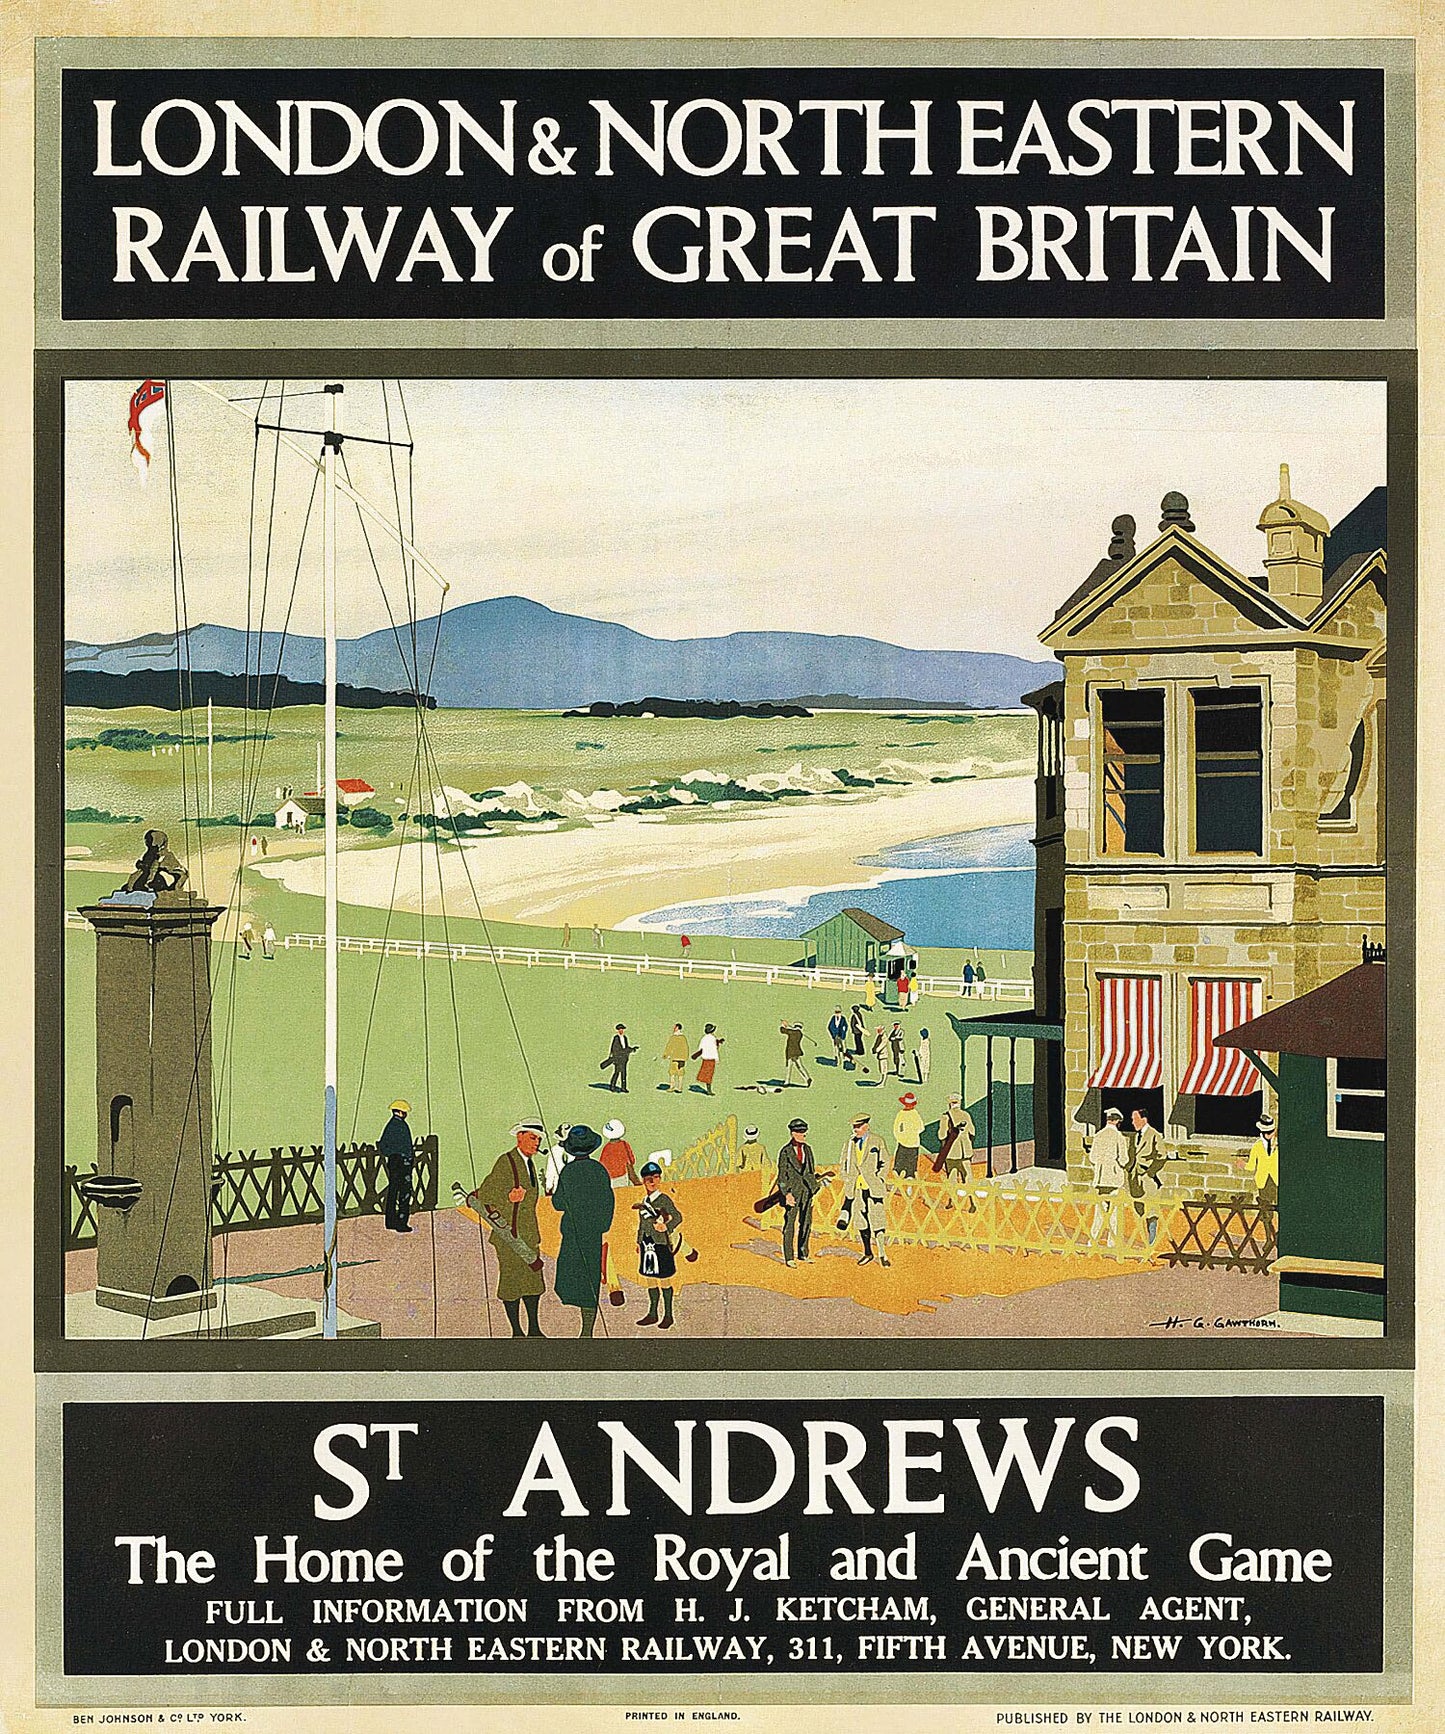 St Andrews by Henry George Gawthorn - c. 1925